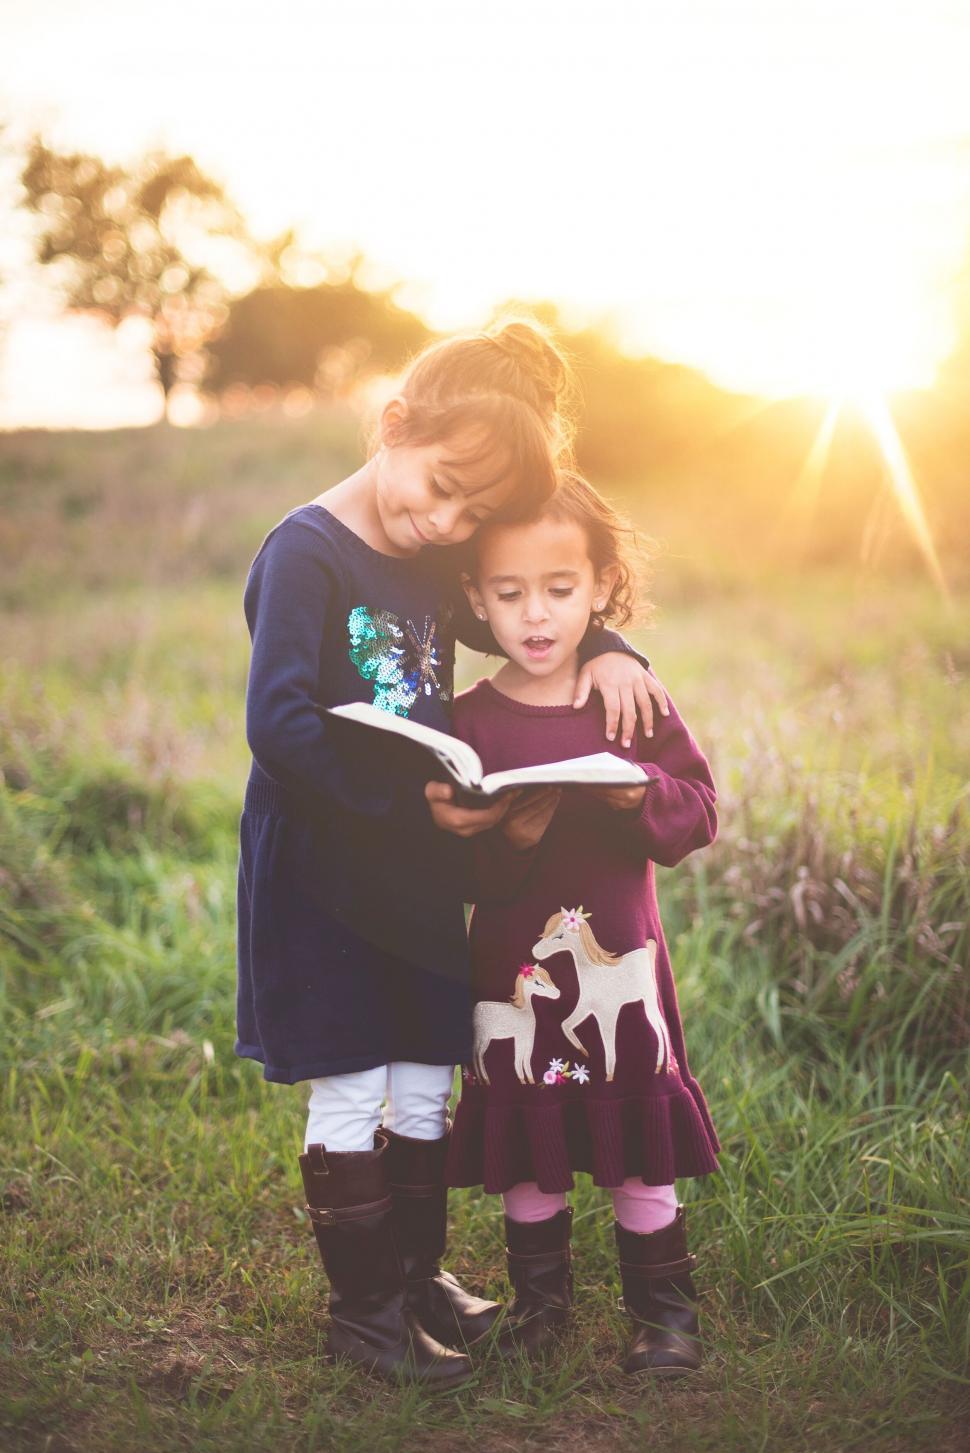 Free Image of Sisters reading a book together in field 